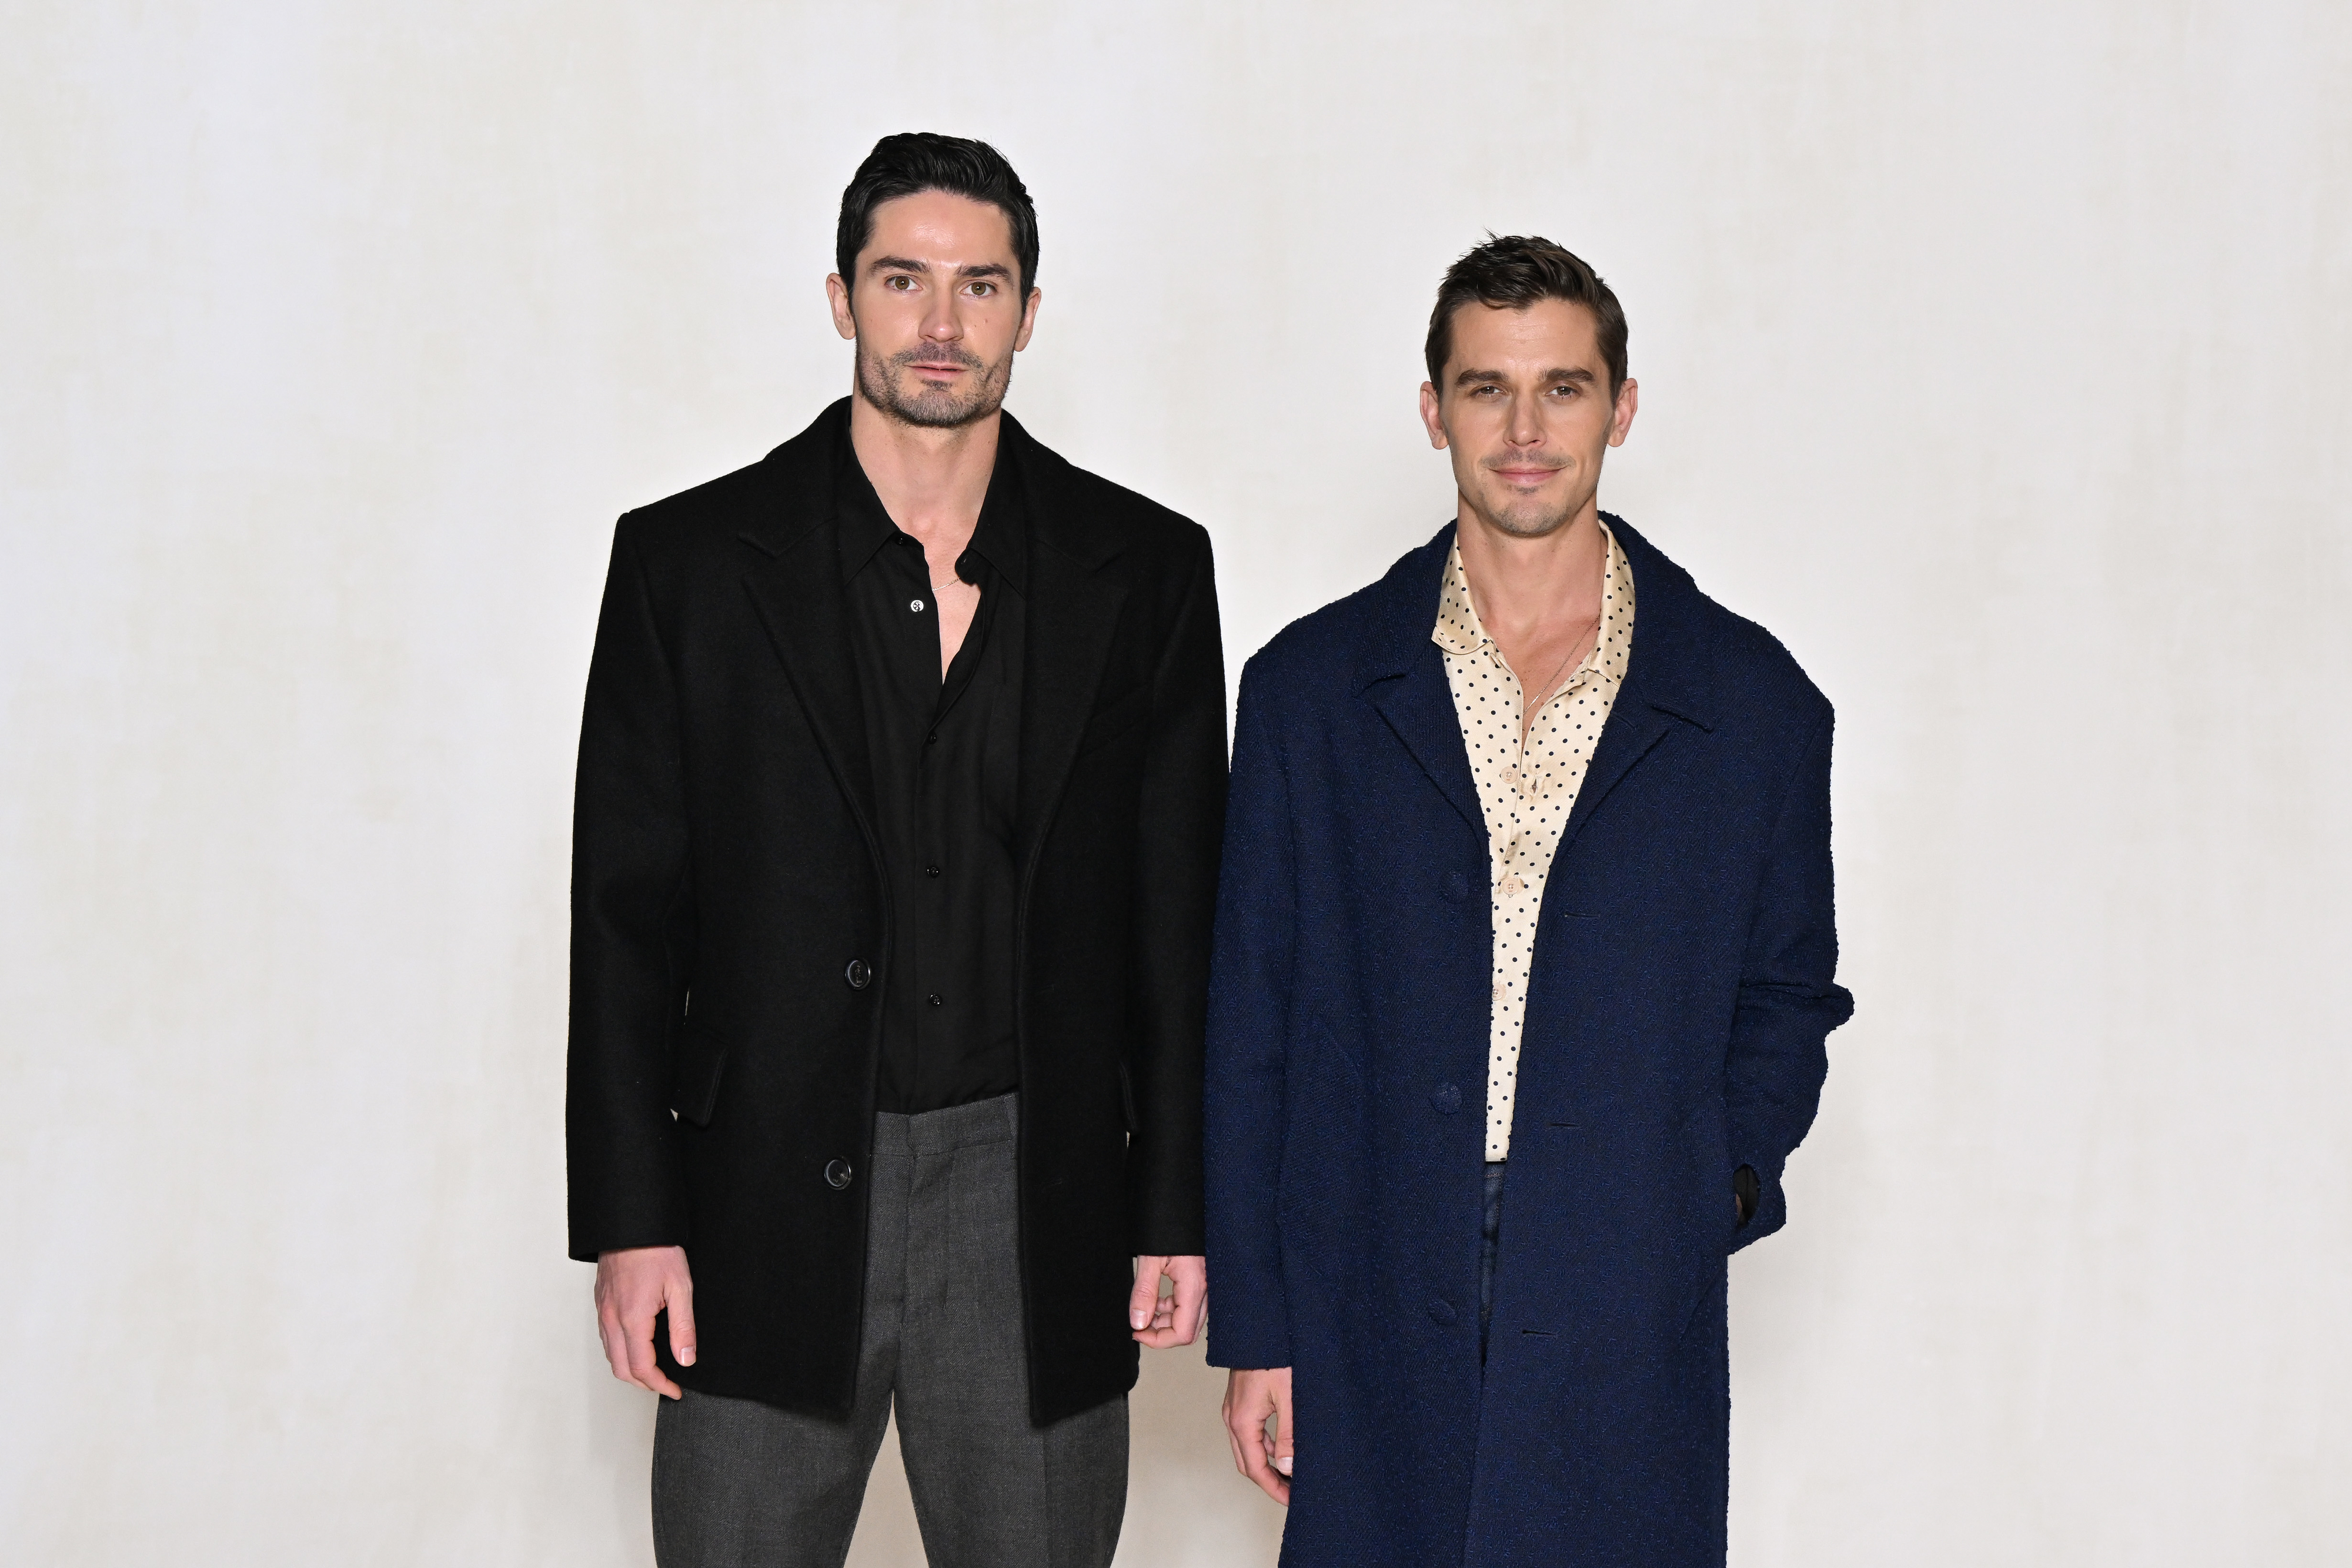 Antoni and Kevin standing together